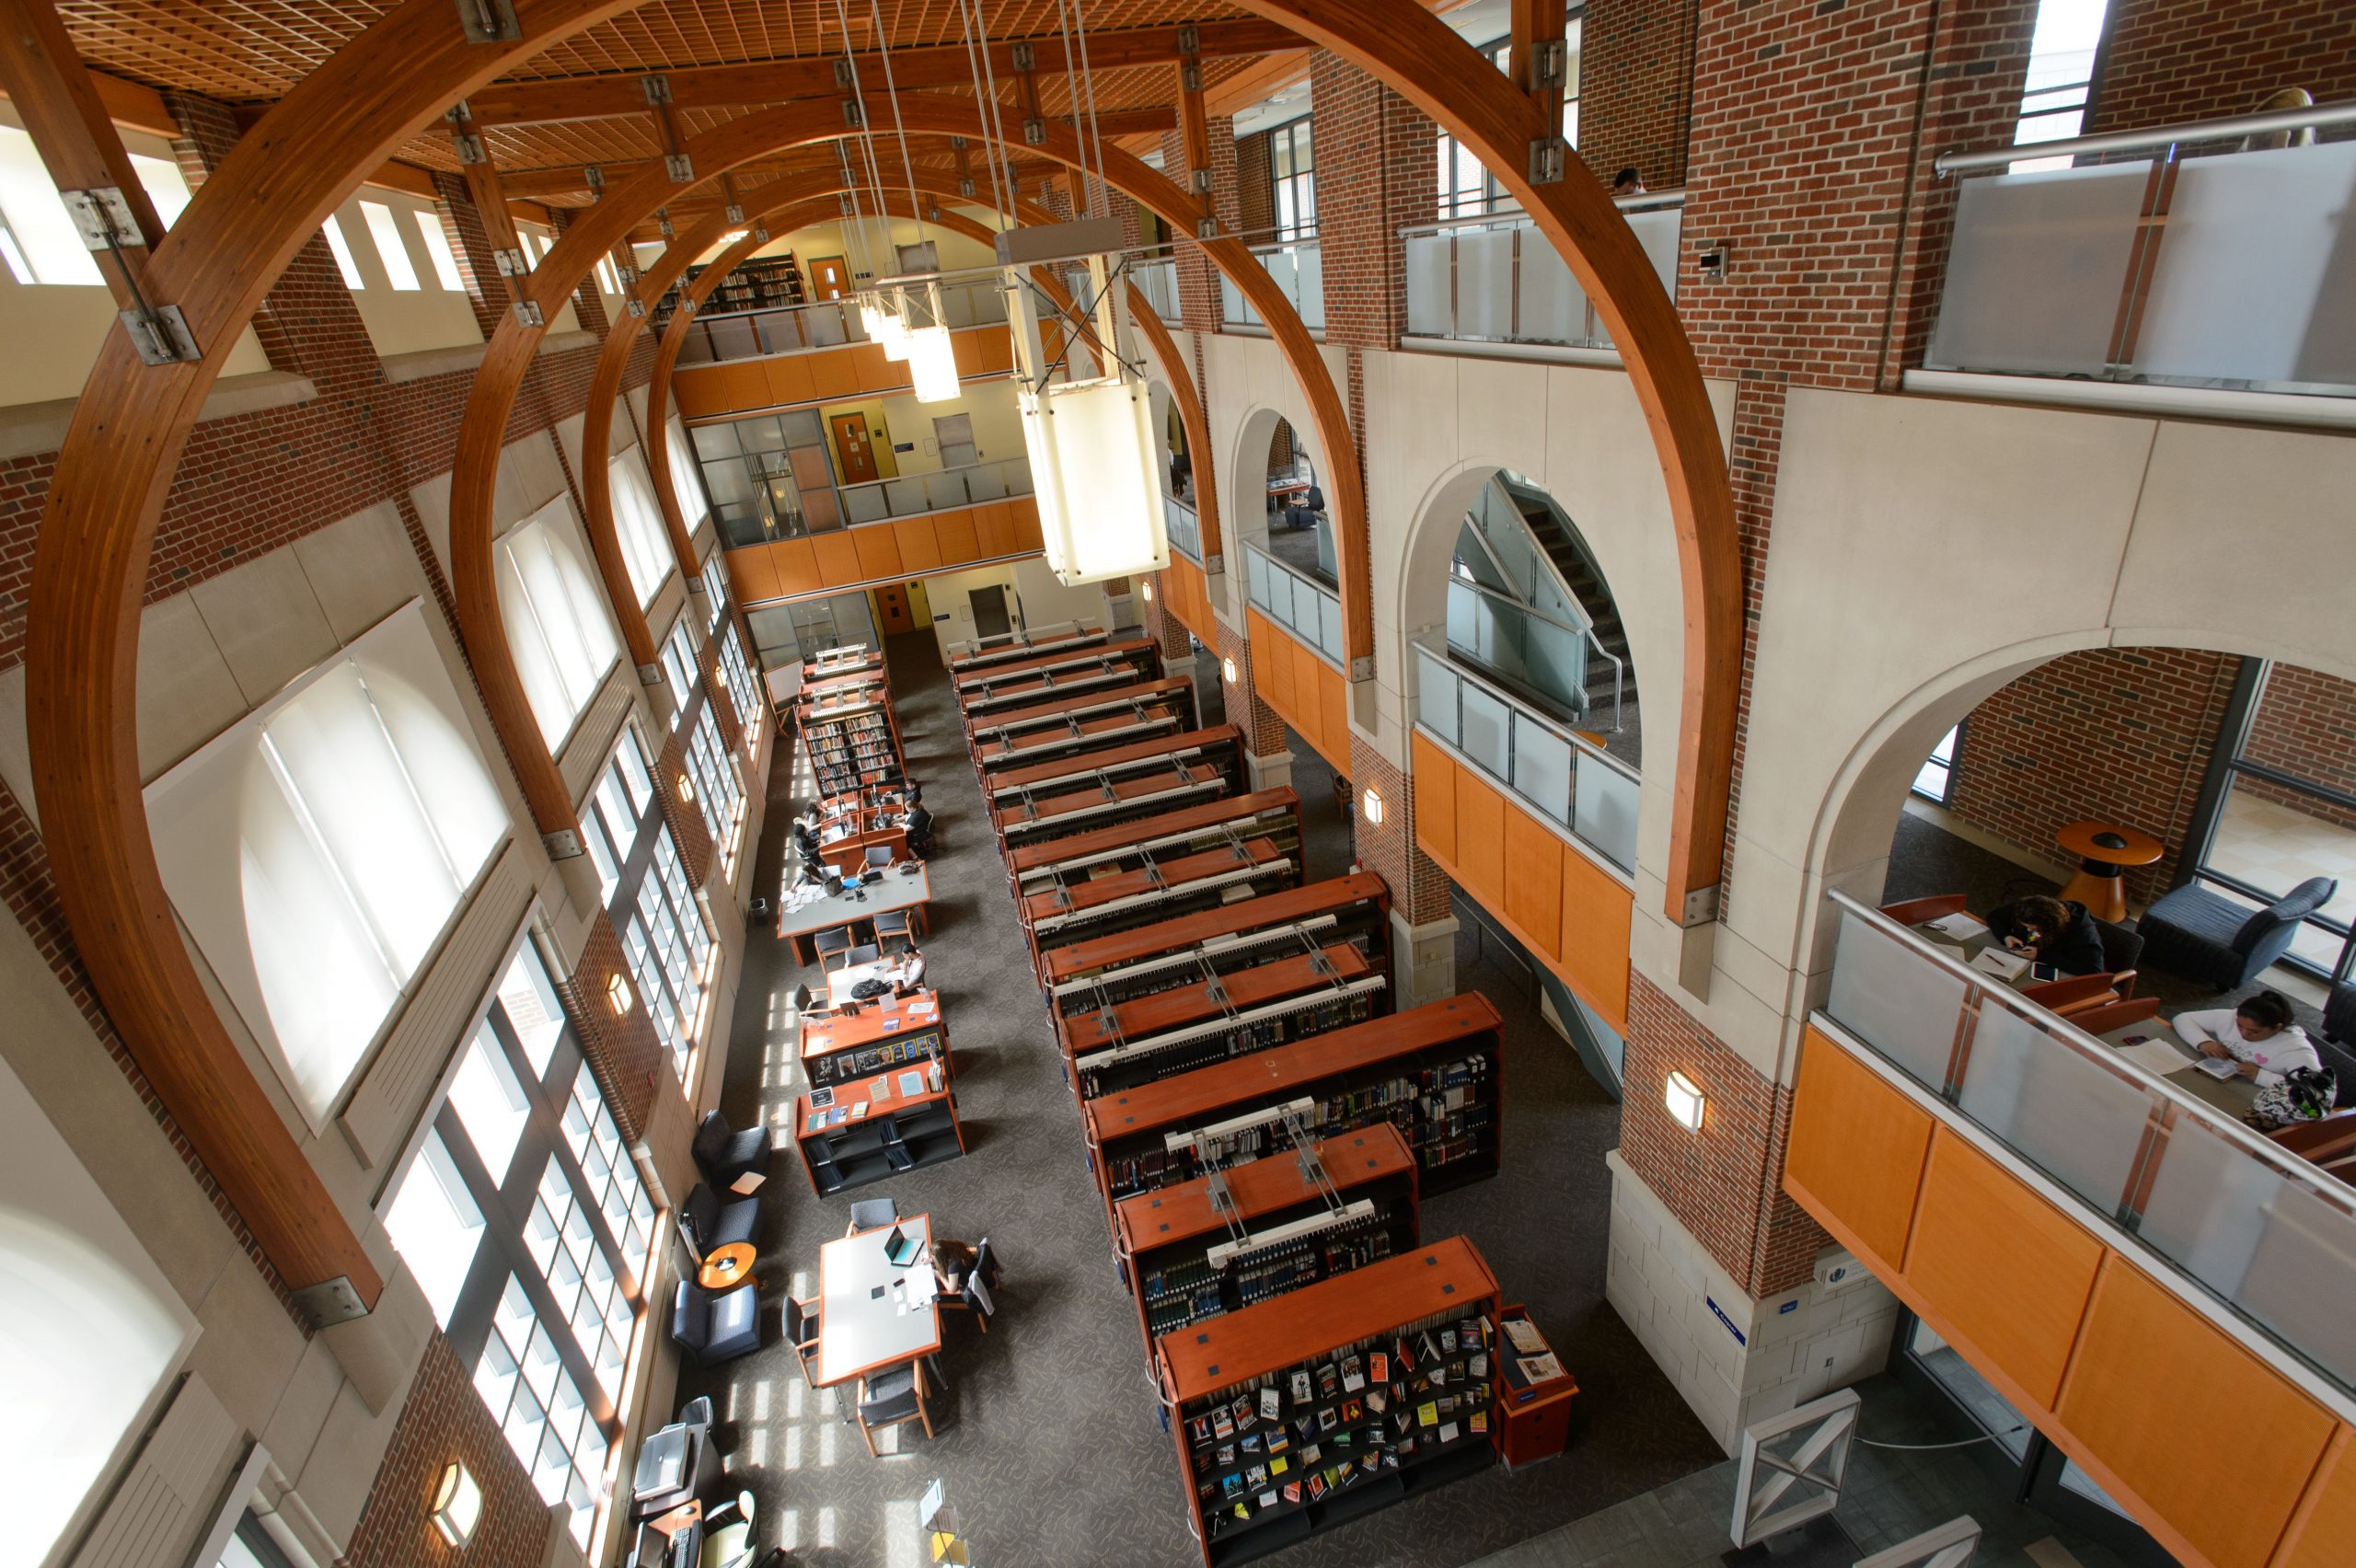 Waterbury Campus Library view through the decorative arches in the ceiling 